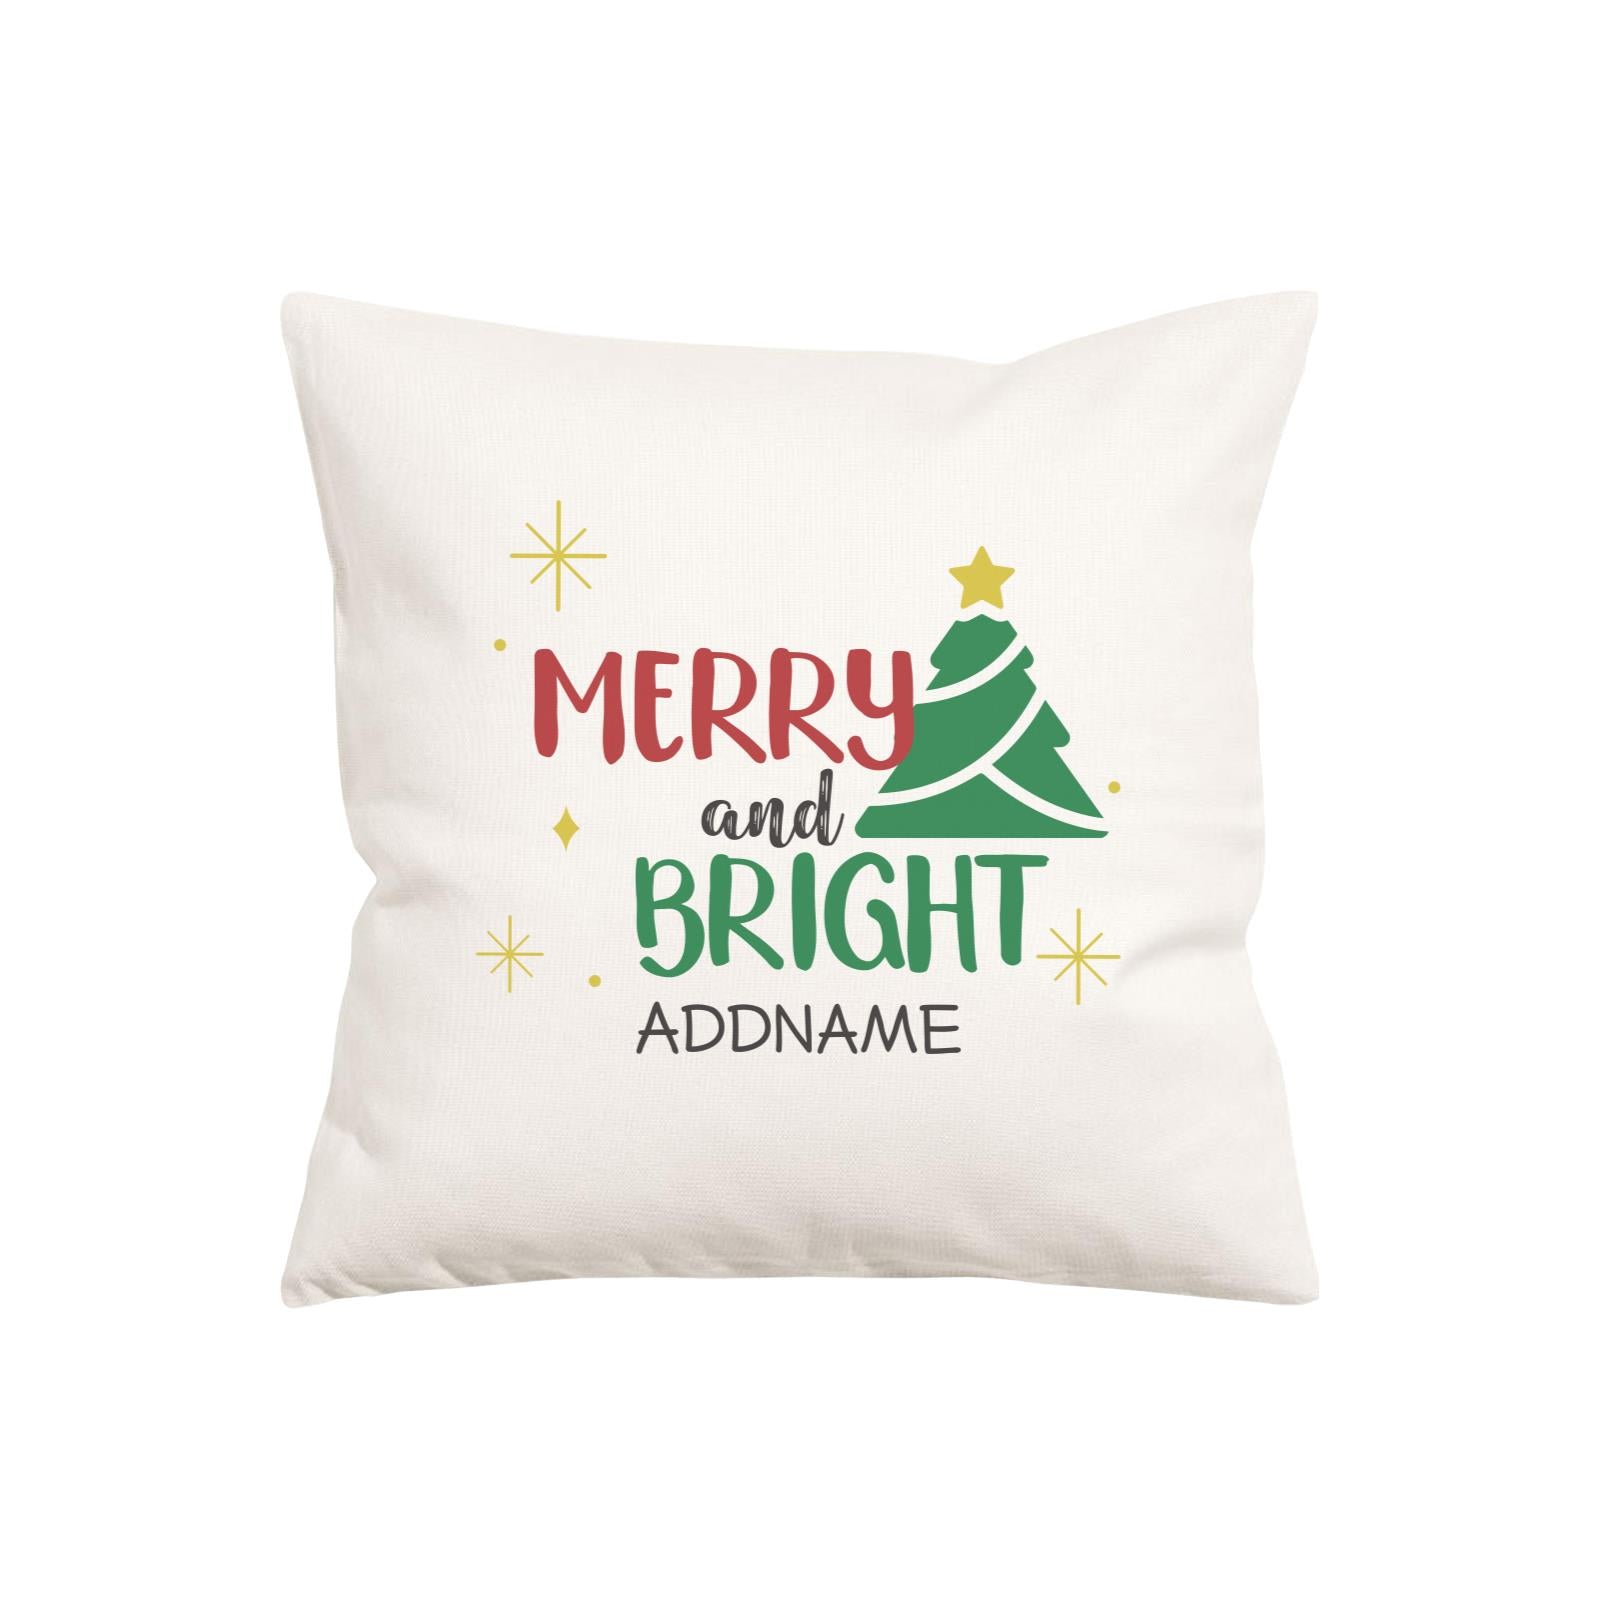 Xmas Merry and Bright with Christmas Tree Pillow Pillow Cushion